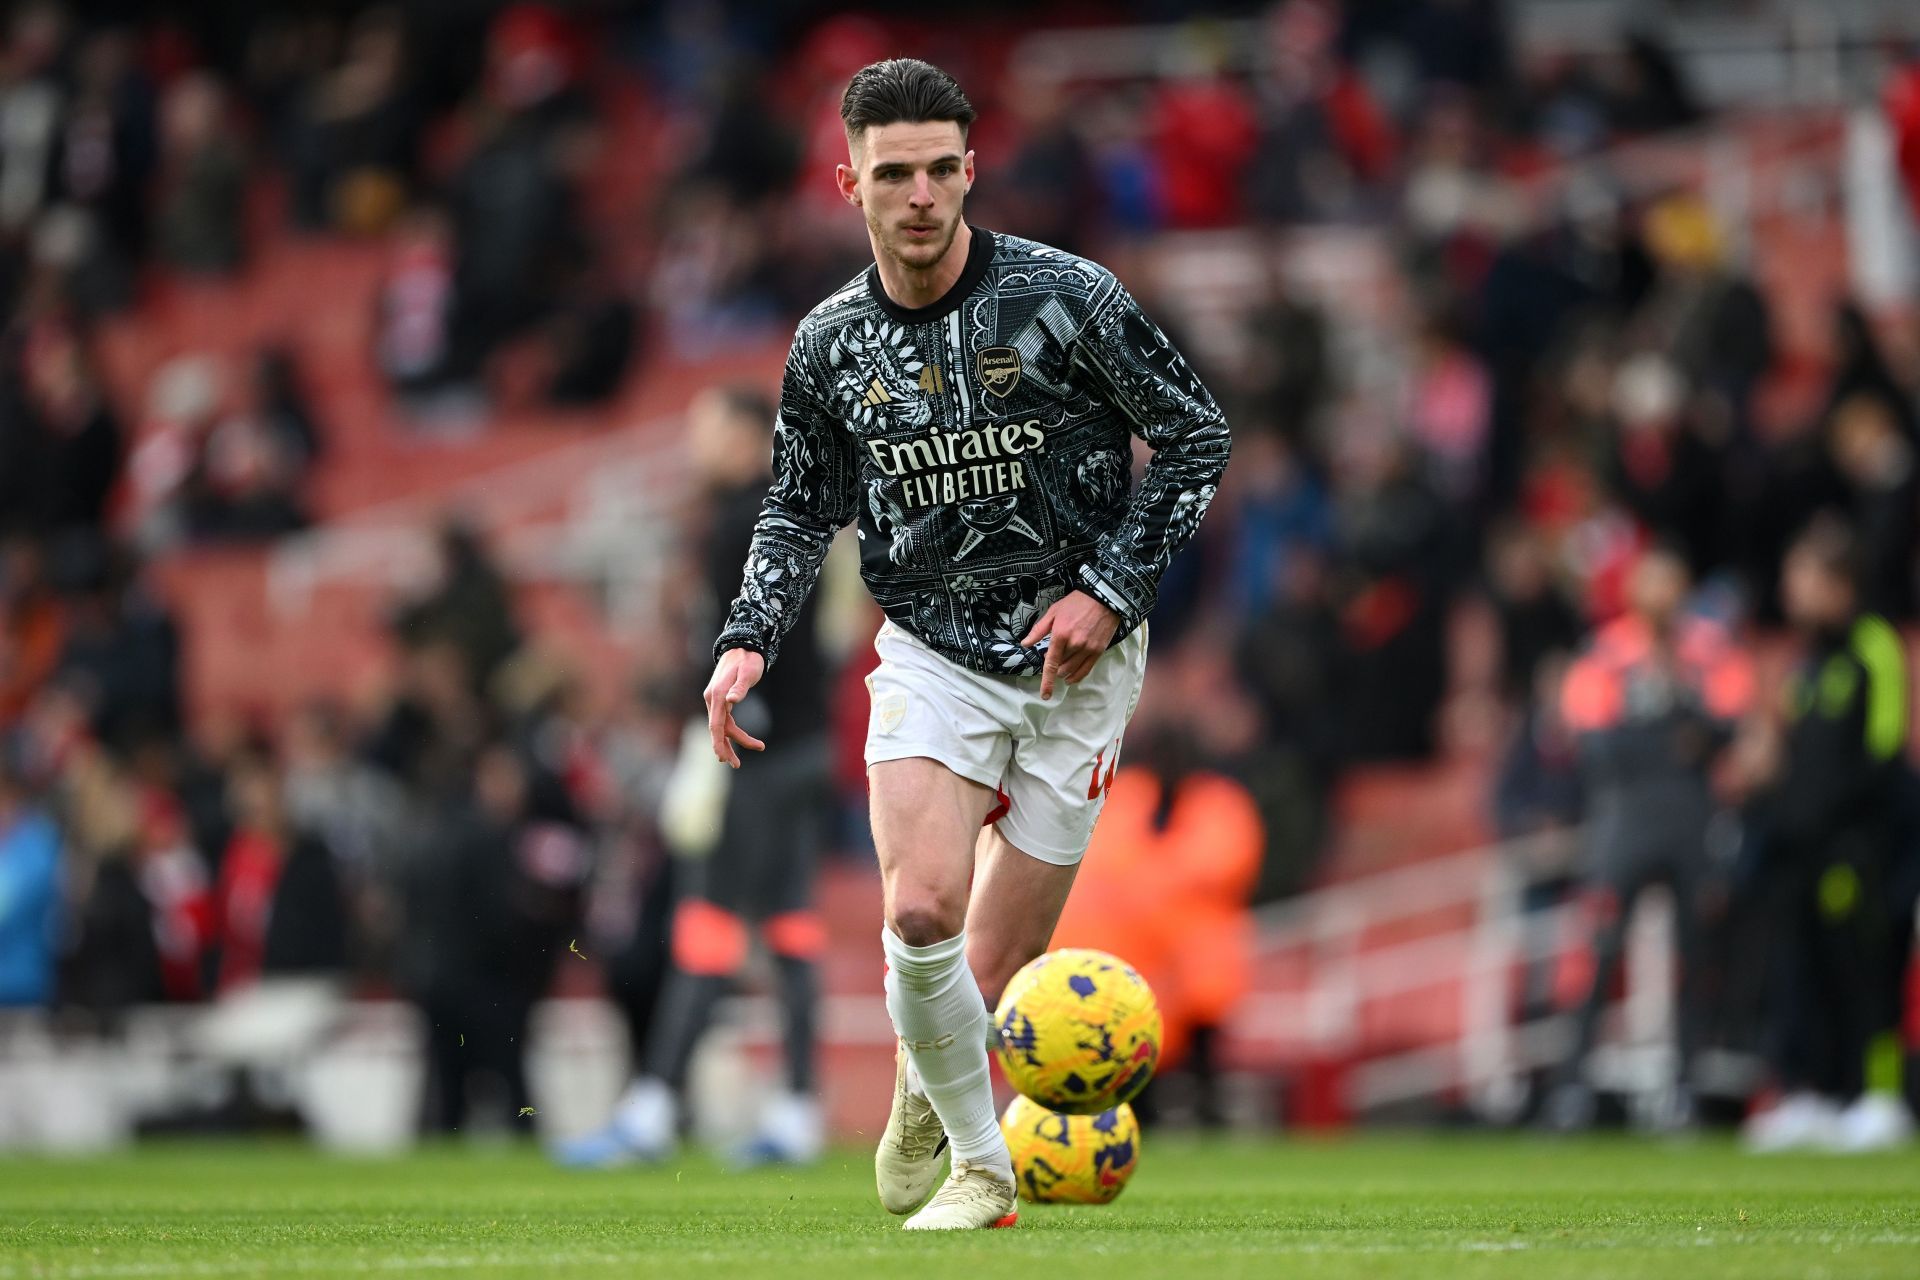 Declan Rice has been a huge hit at the Emirates.